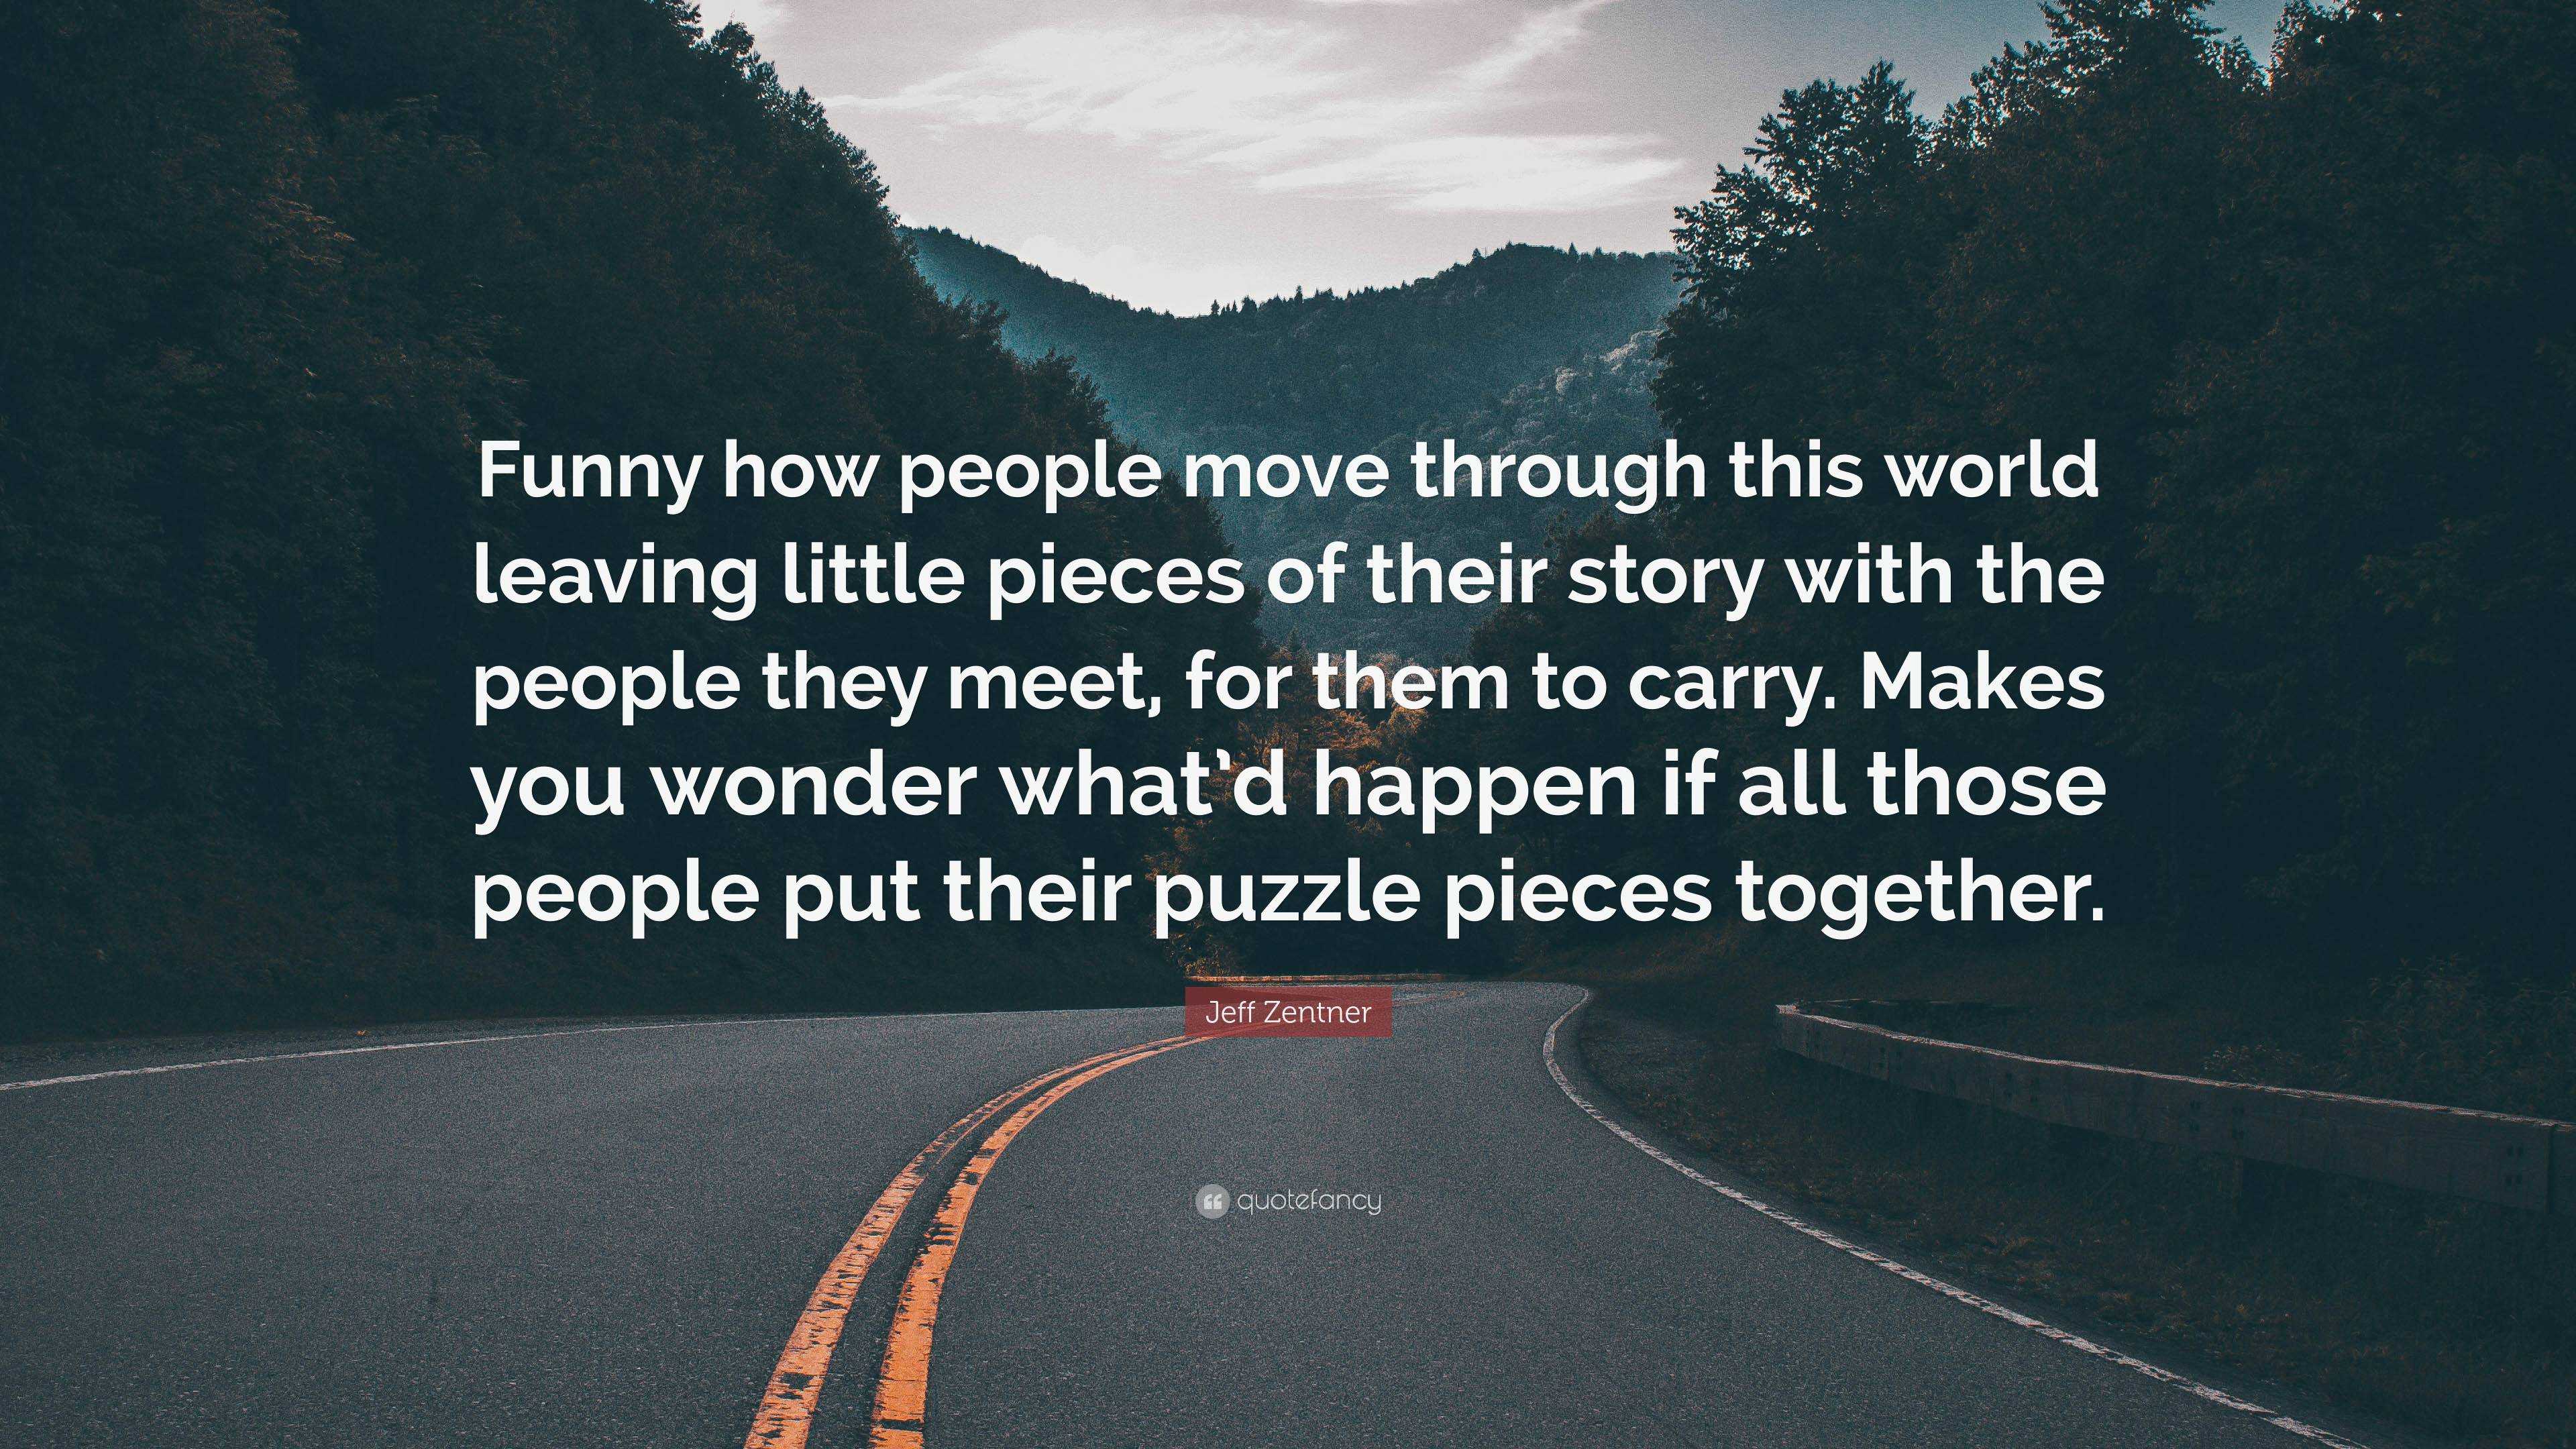 Jeff Zentner Quote: “Funny how people move through this world leaving  little pieces of their story with the people they meet, for them to car...”